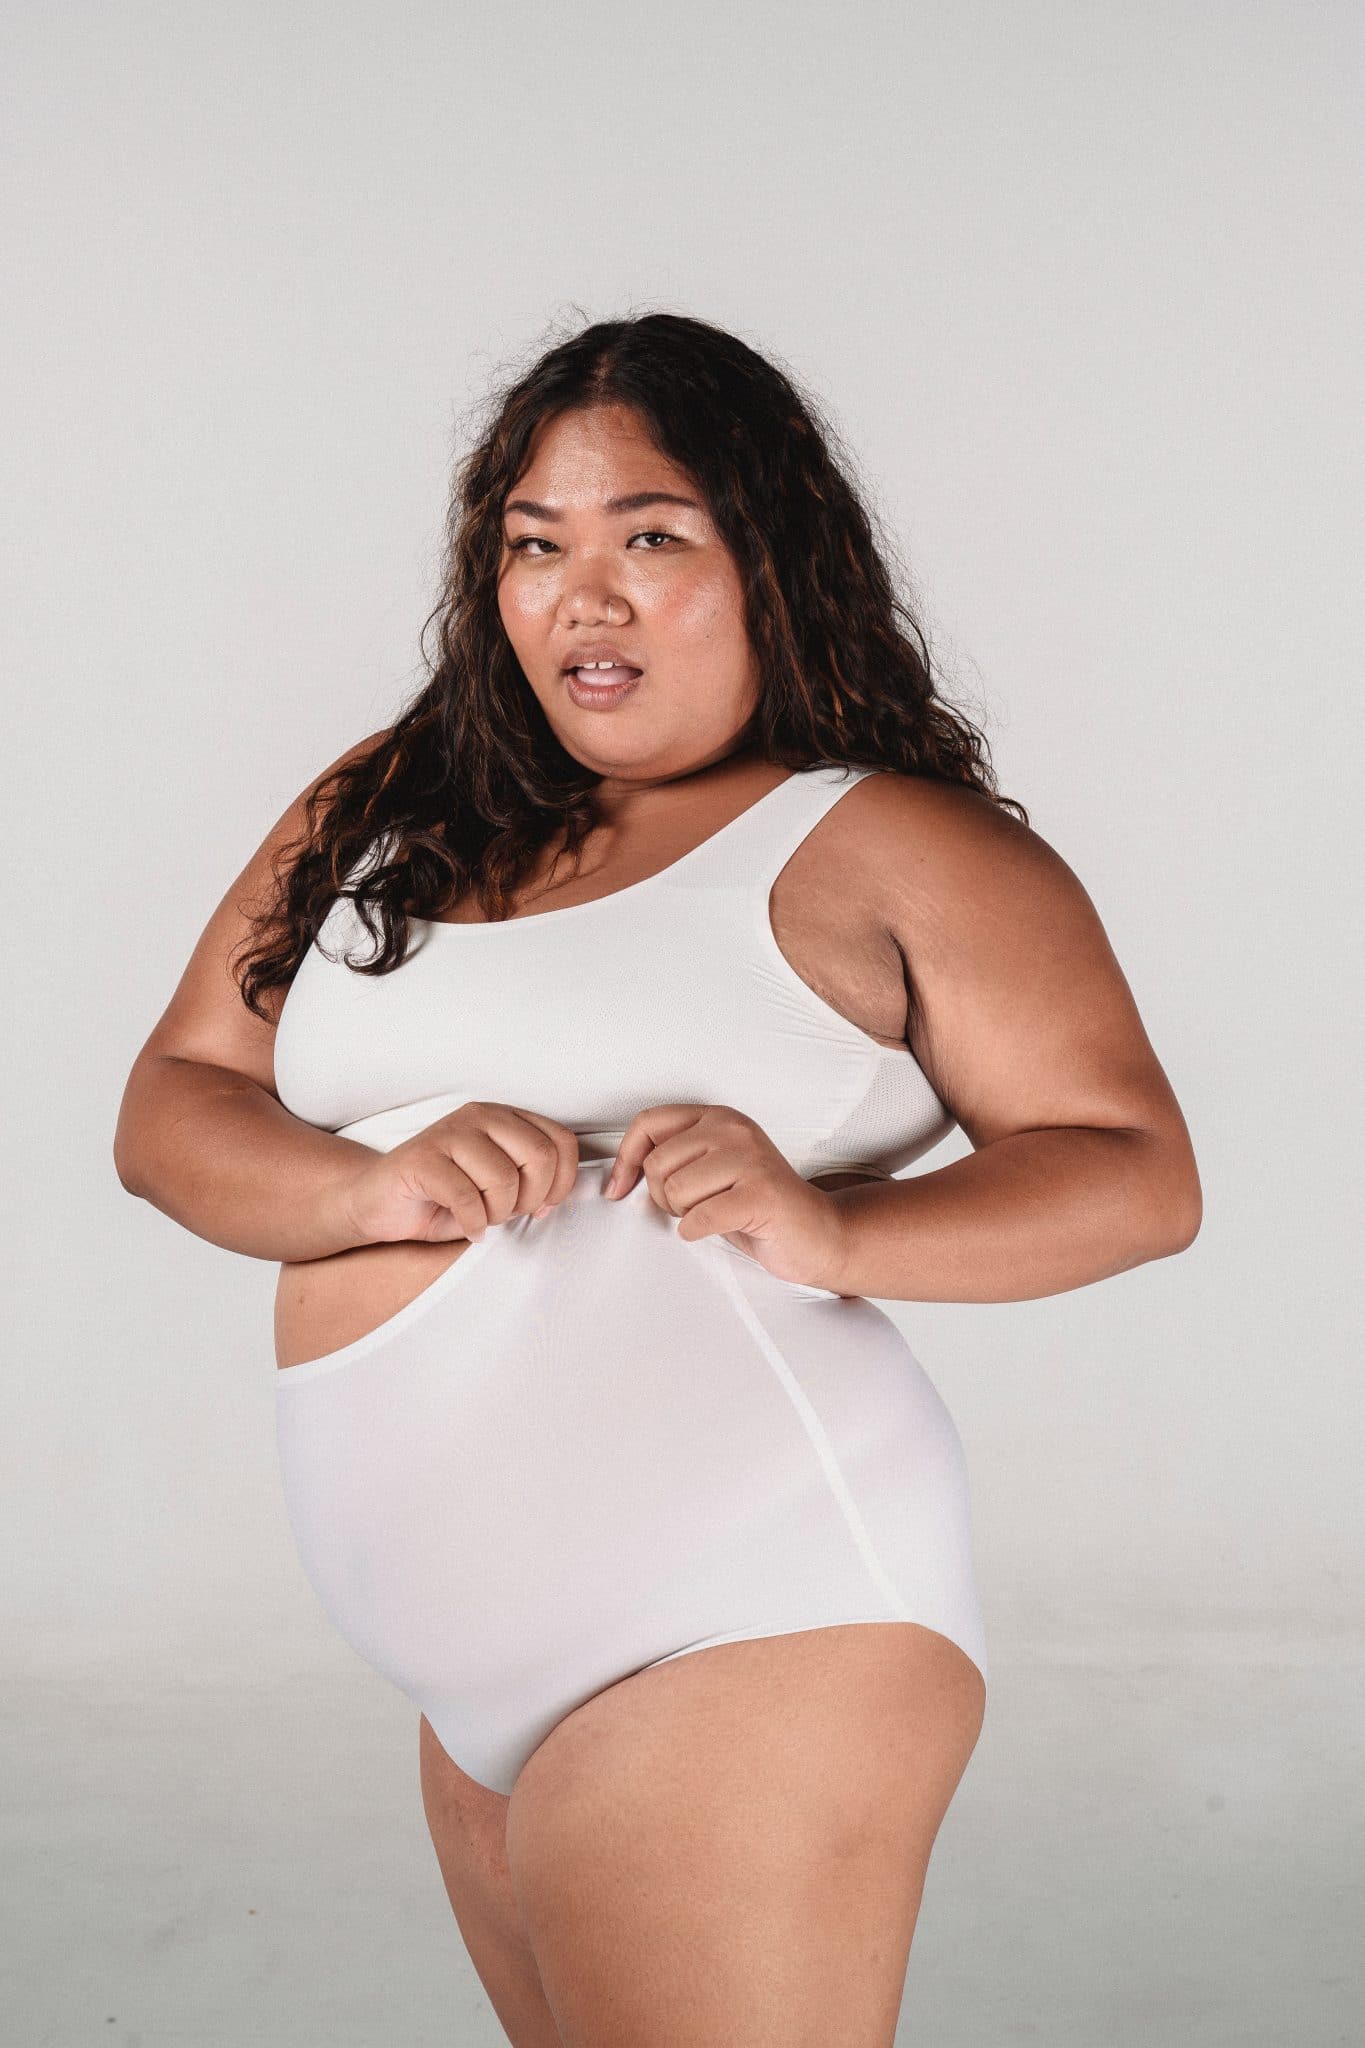 Should you go down a size in shapewear when purchasing?